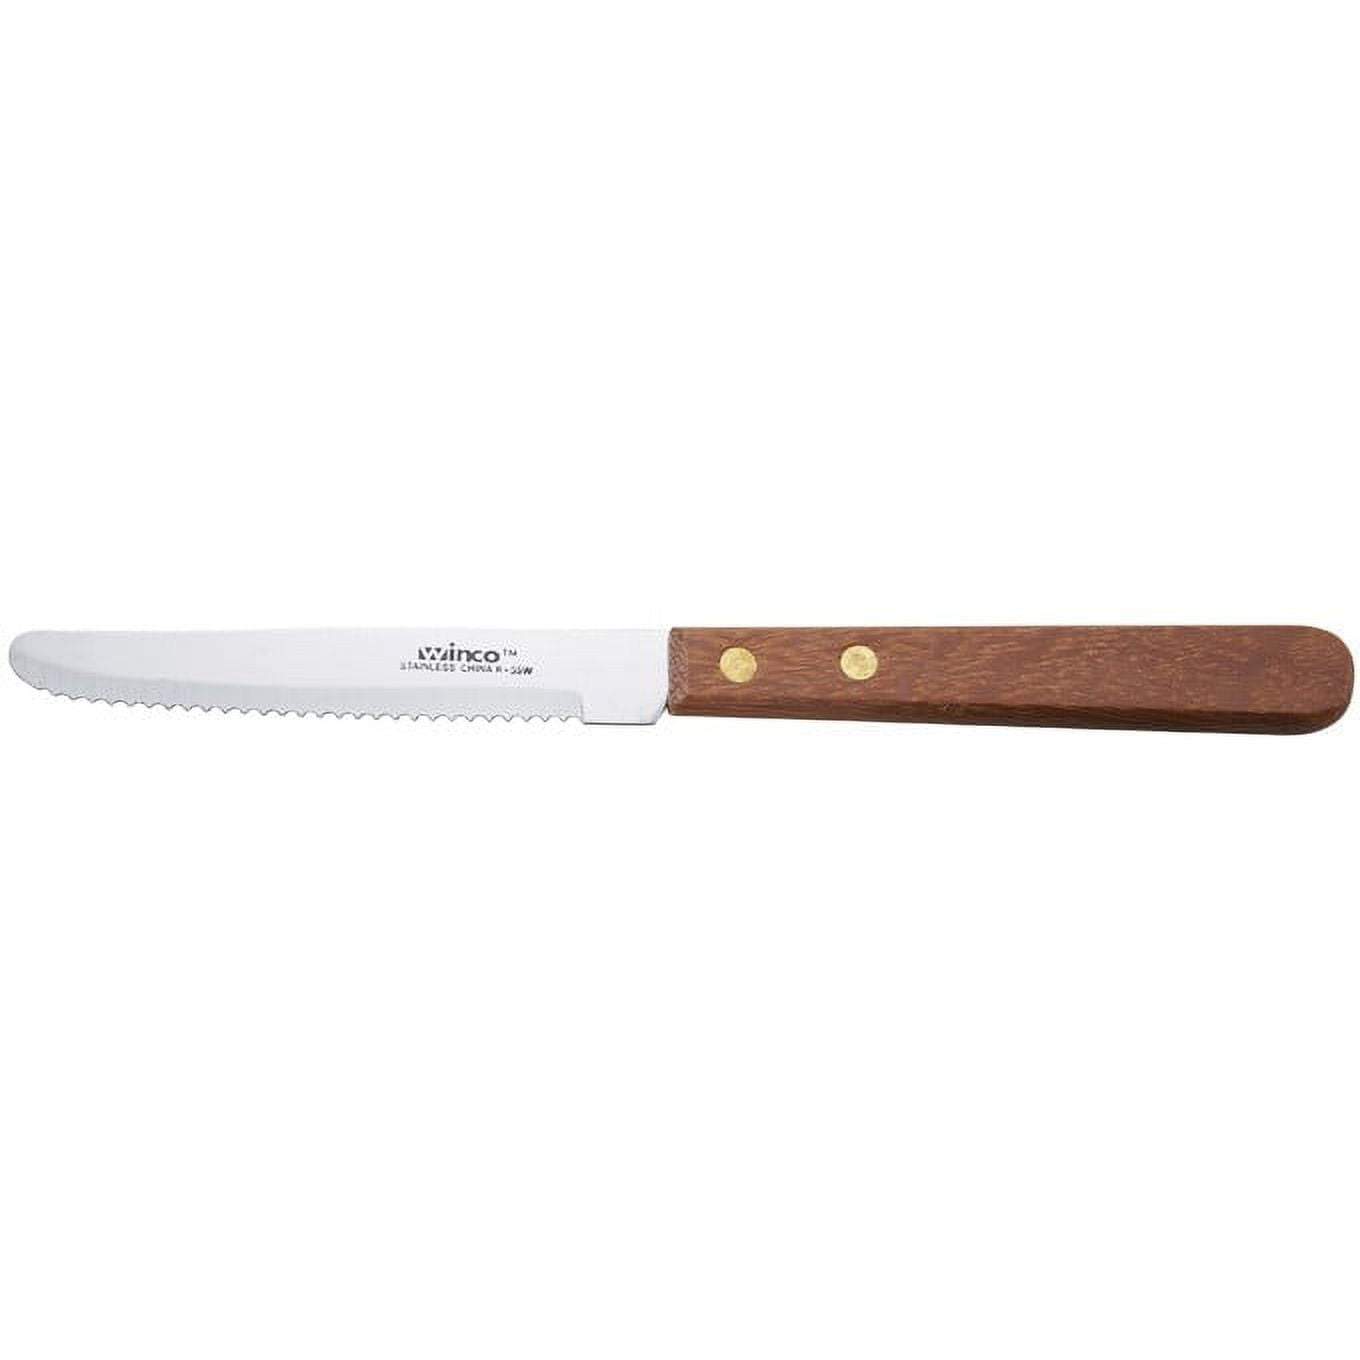 Knives - Steak Knife Rounded Serrated Blade Pineapple Wood Handle W/Rivets  - 5794WP059